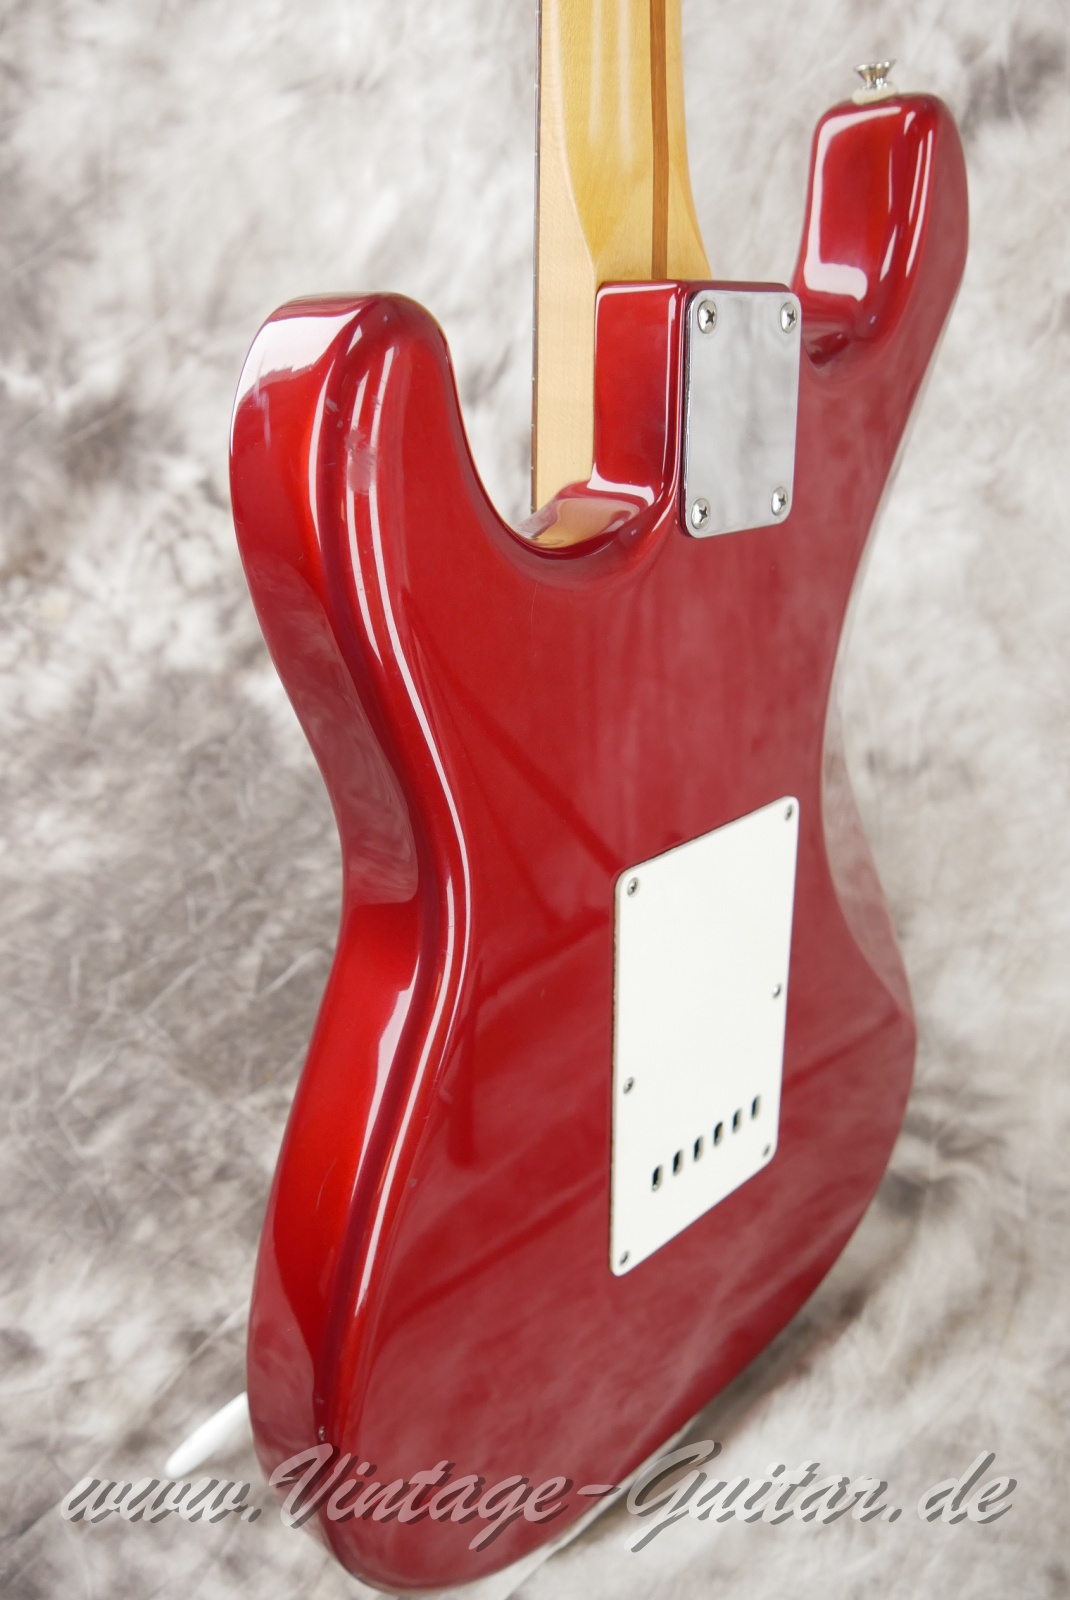 Fender_Stratocaster_Mexico_candy_apple_red_1991-011.JPG